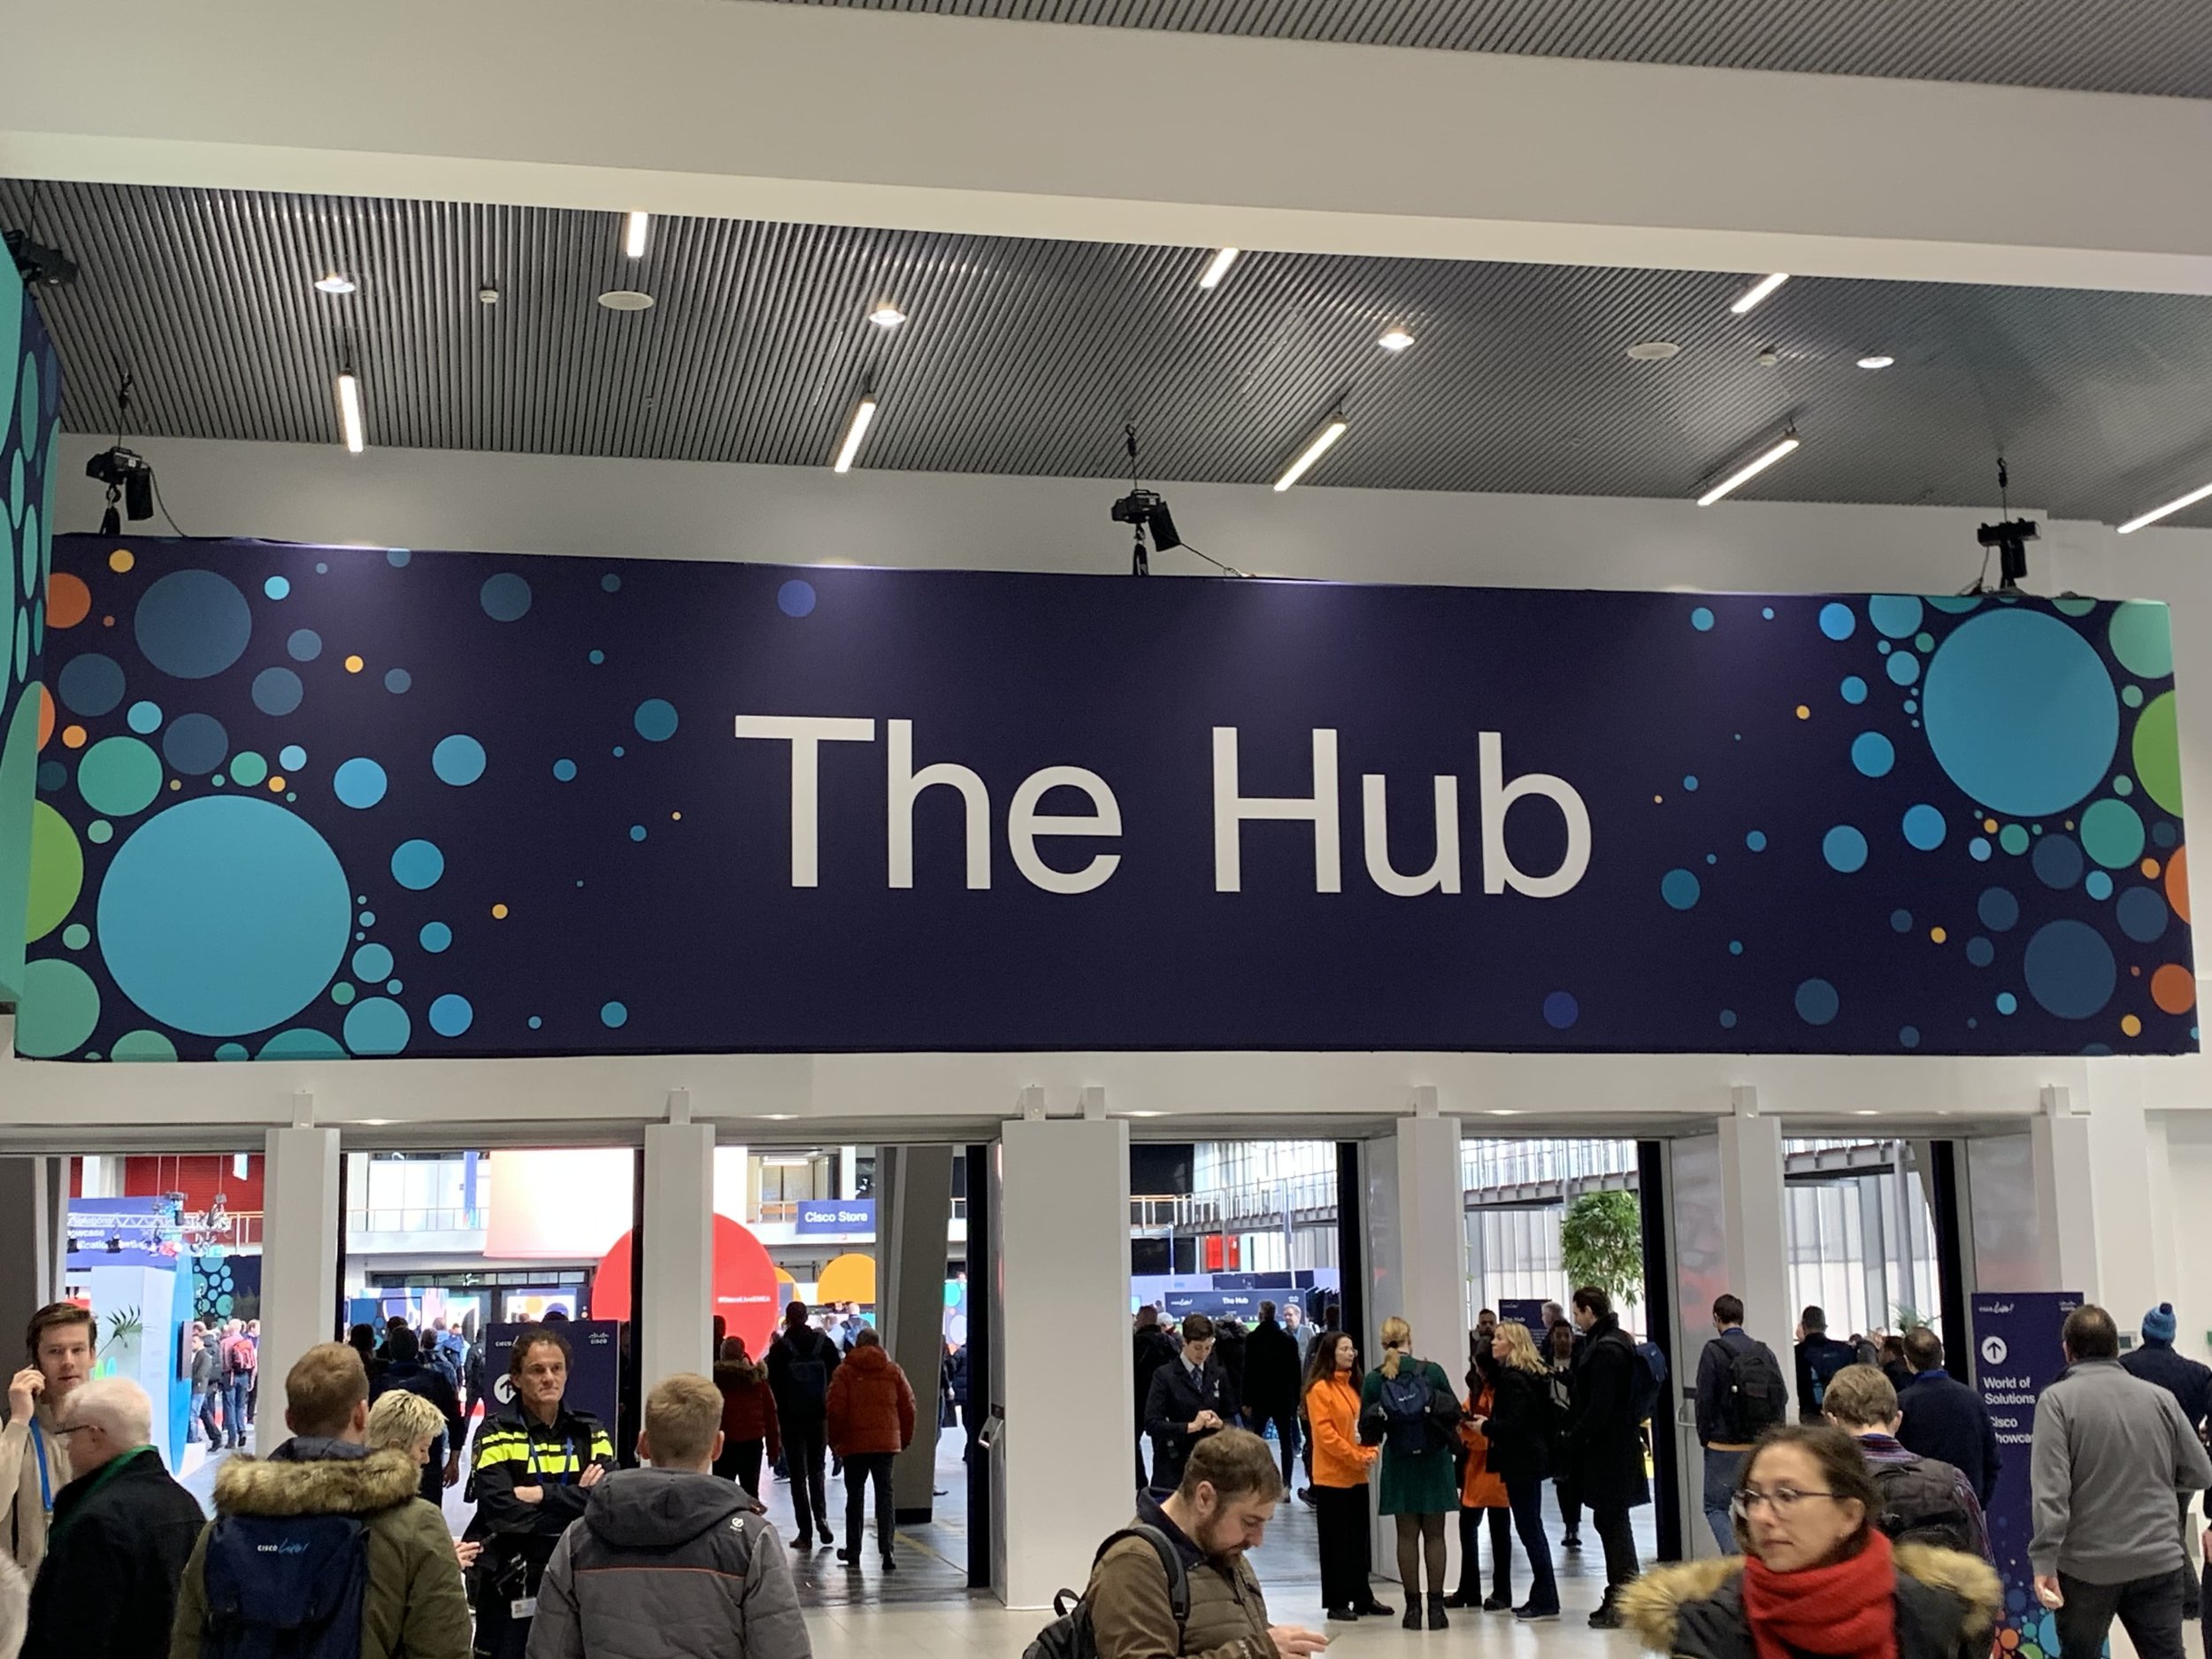 Entrance to The Hub